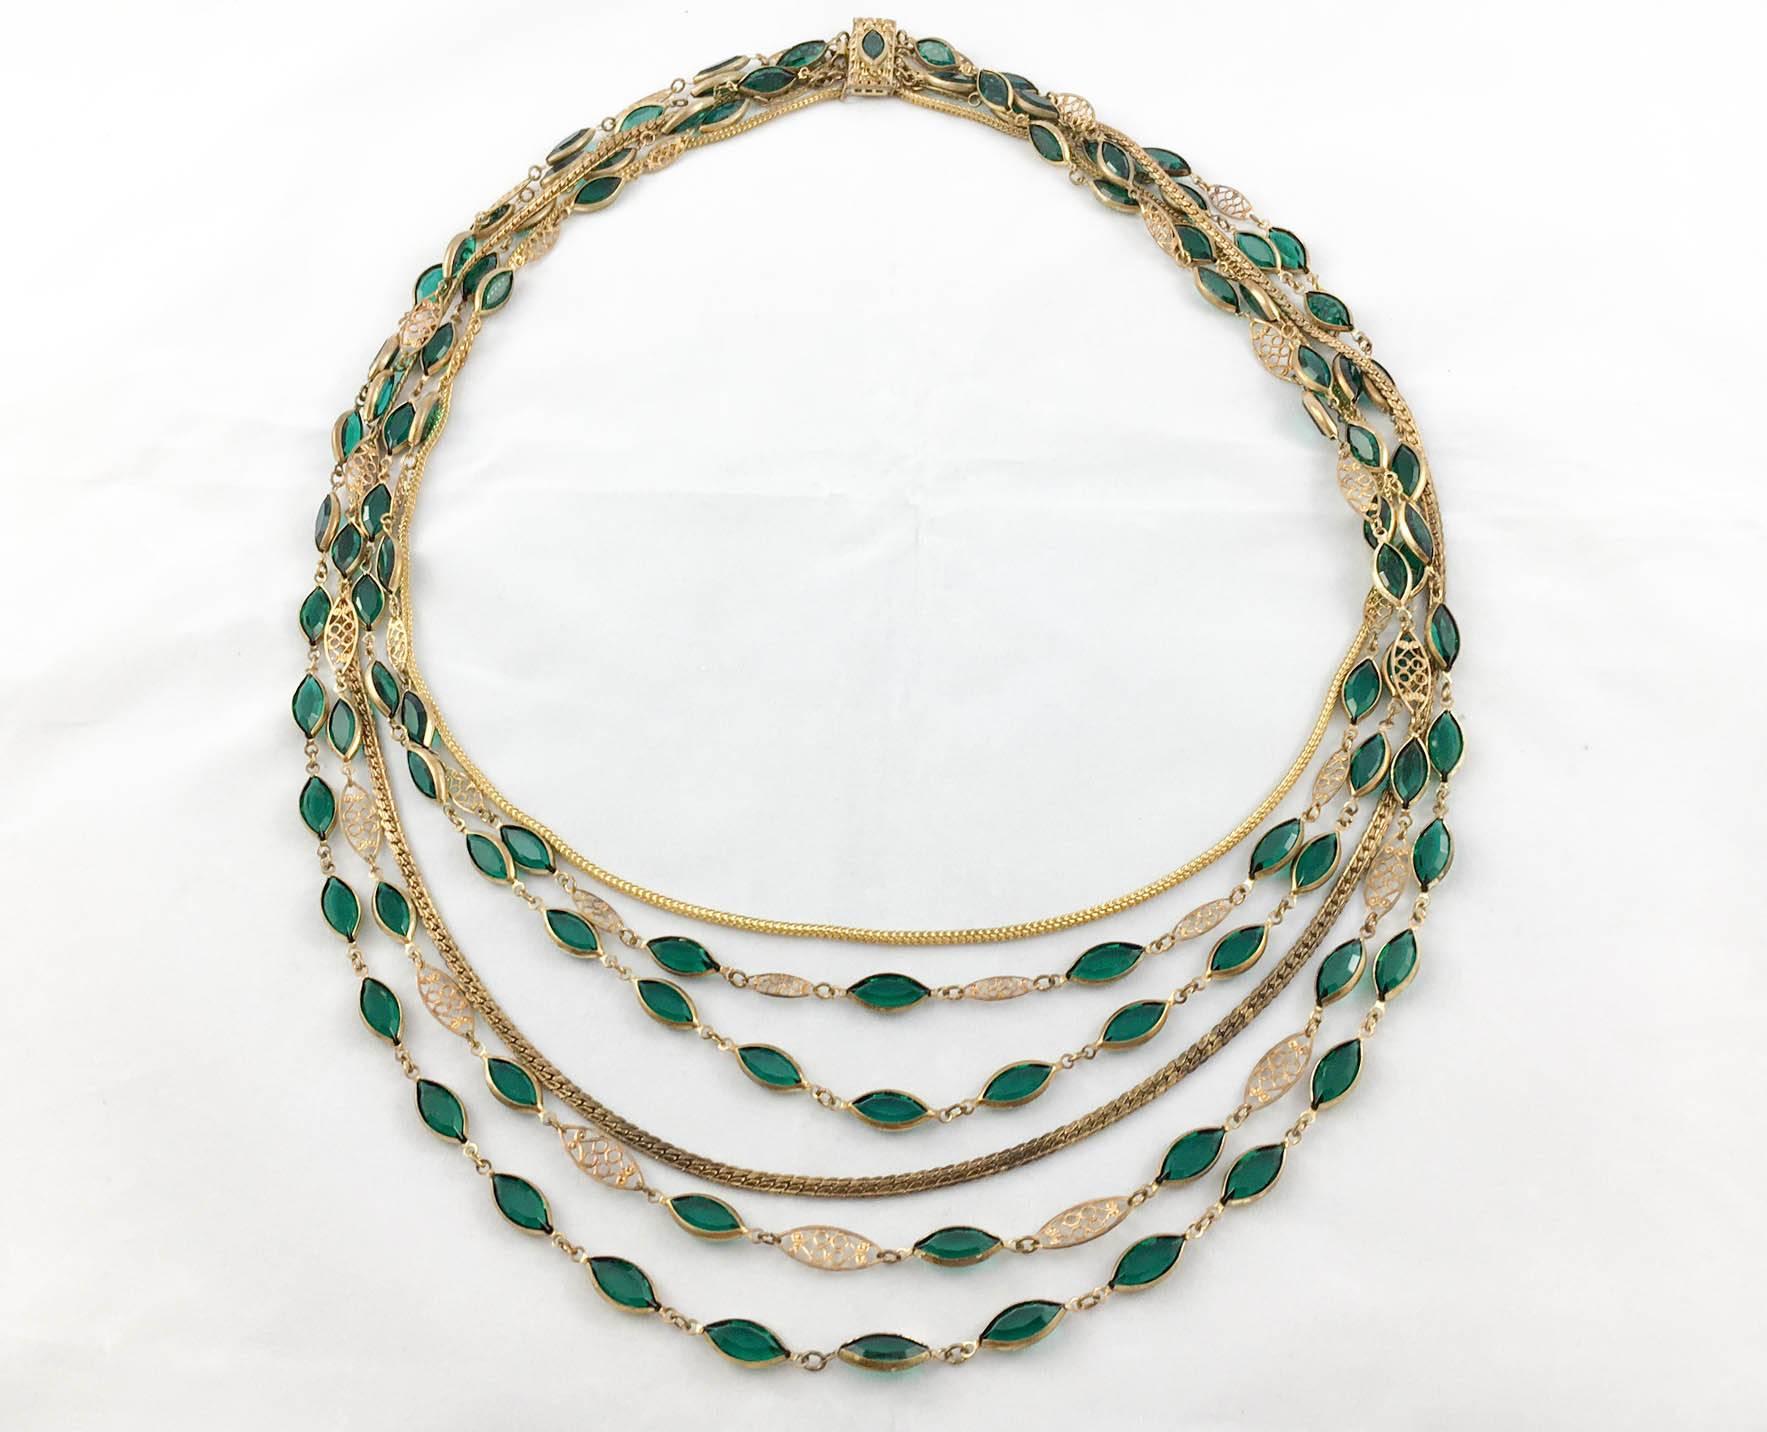 Striking Vintage Multi-Strand Necklace. This spectacular piece is made of 6 strings featuring green paste and gold-tone metal. This is a unique piece, probably from France and from the 1940s/1950s. It comprises different design aspects from the